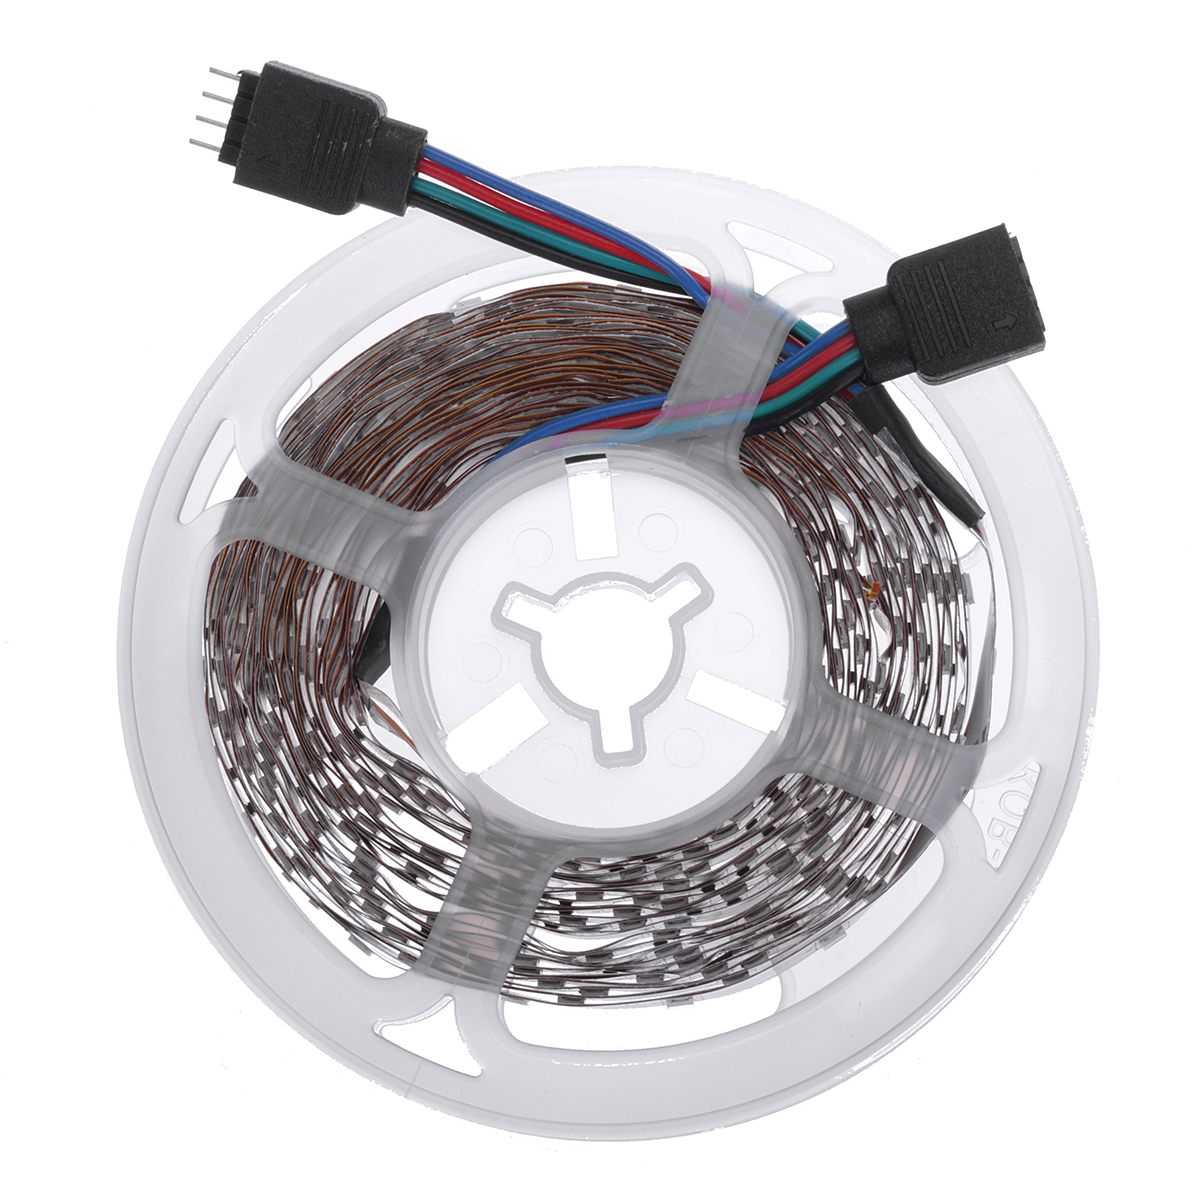 Find DC12V 2835SMD 5M 300LED Strip Light Waterproof Non waterproof RGB Lamp 24/44 key IR Controller Power Adapter for Sale on Gipsybee.com with cryptocurrencies